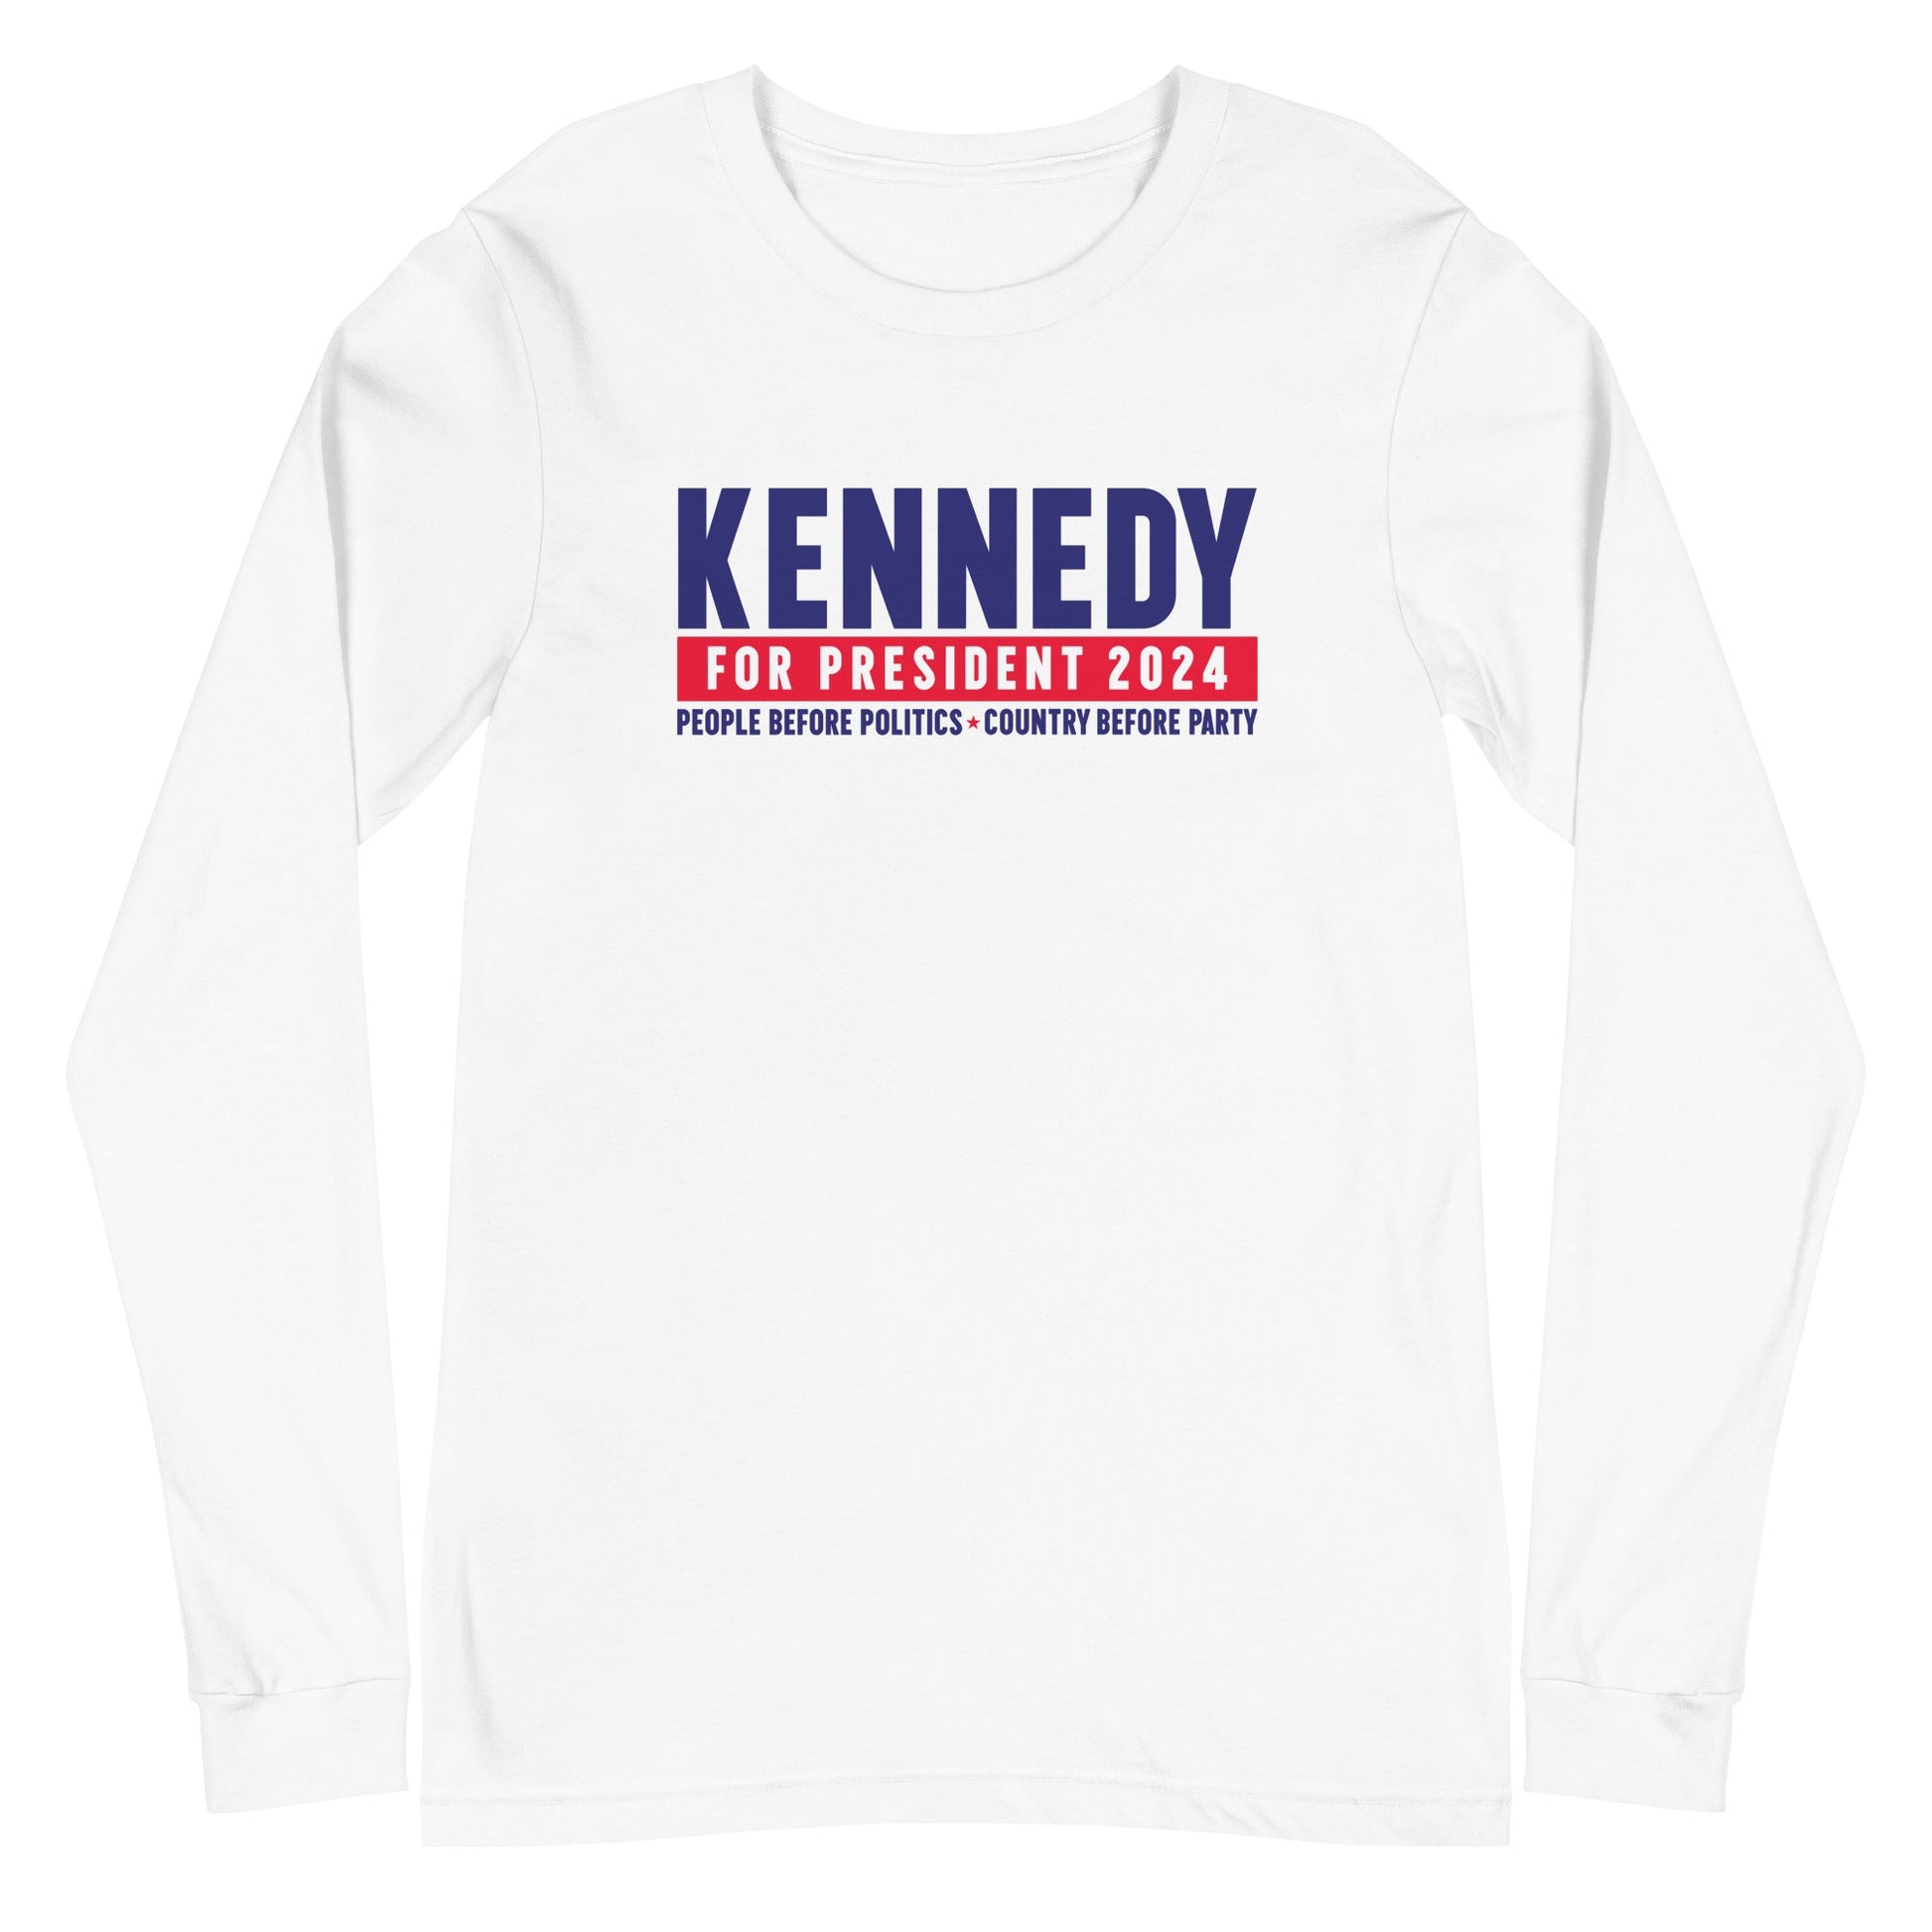 Kennedy for the People Unisex Long Sleeve Tee - TEAM KENNEDY. All rights reserved